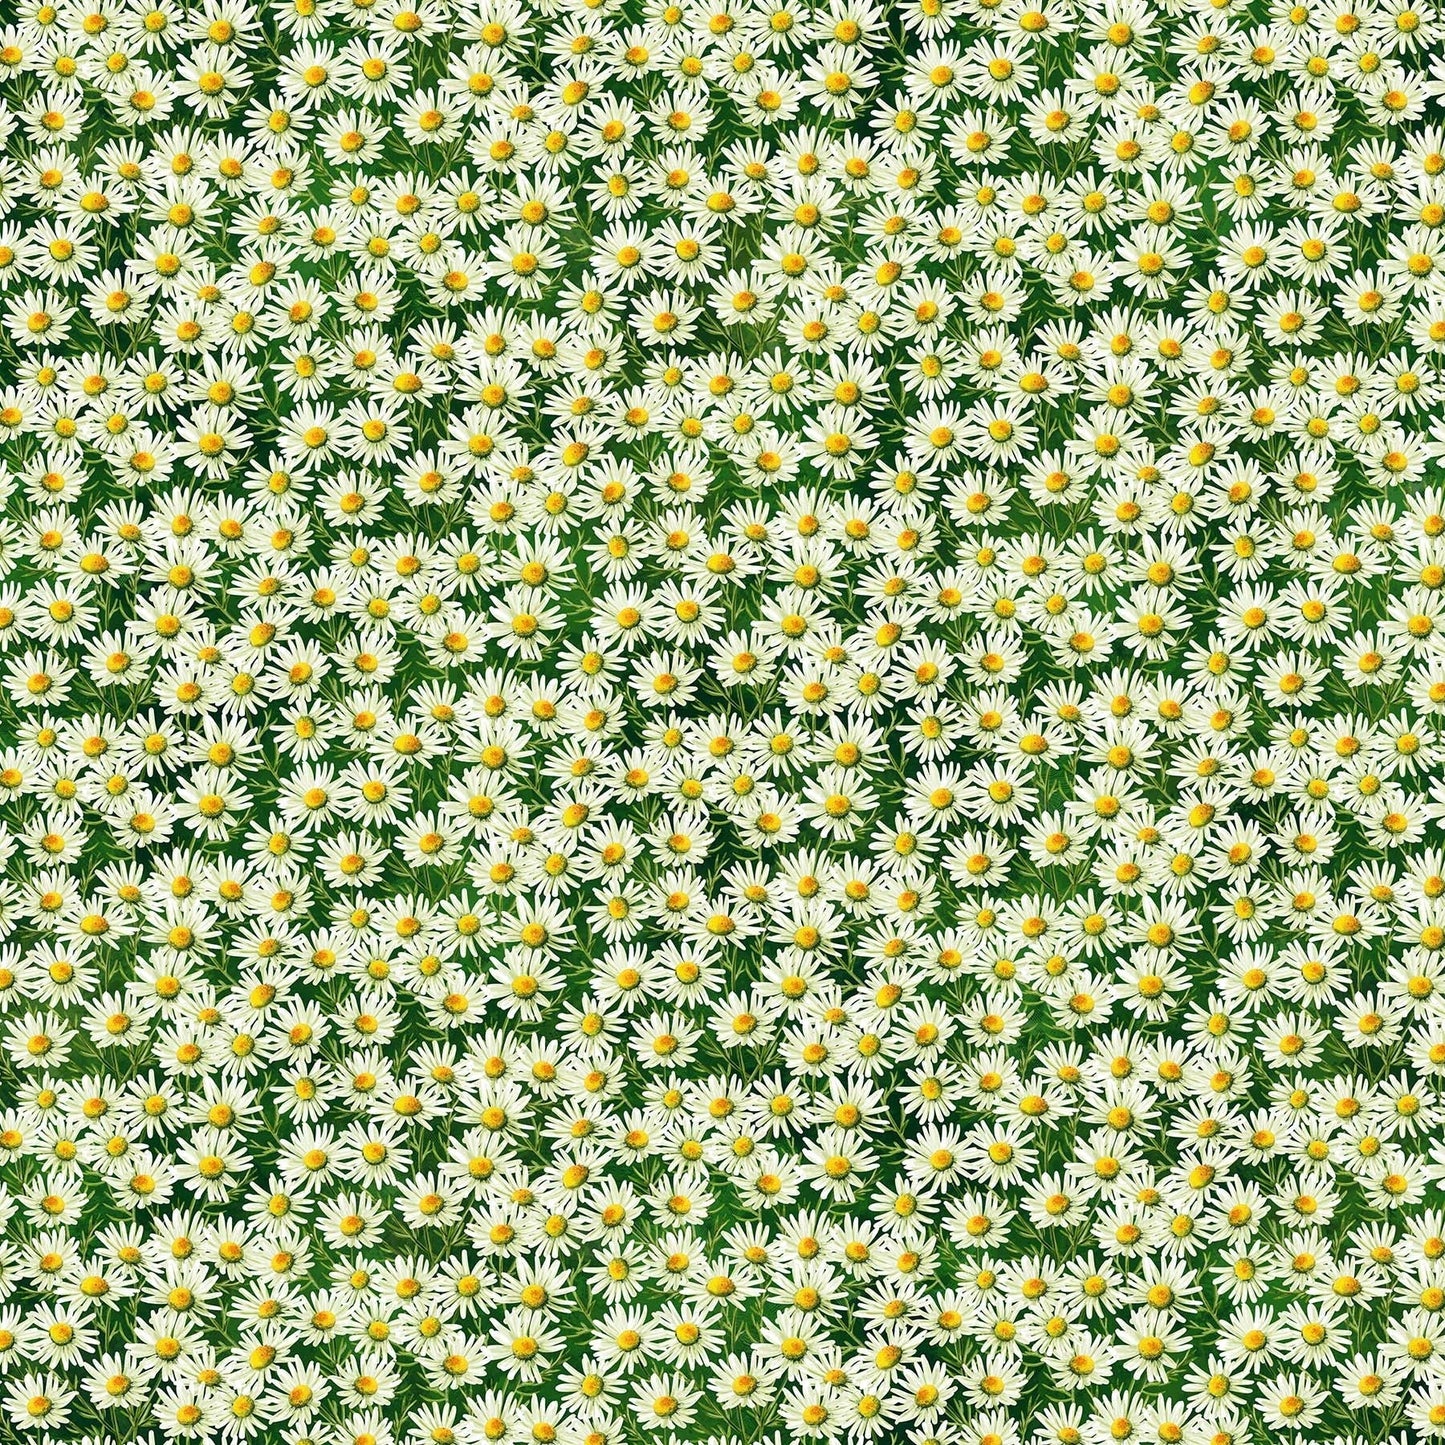 Northcott Fabric by the Yard FQ (18" x 21") Sunshine Harvest Daisies on Green Floral Cotton 25458-78